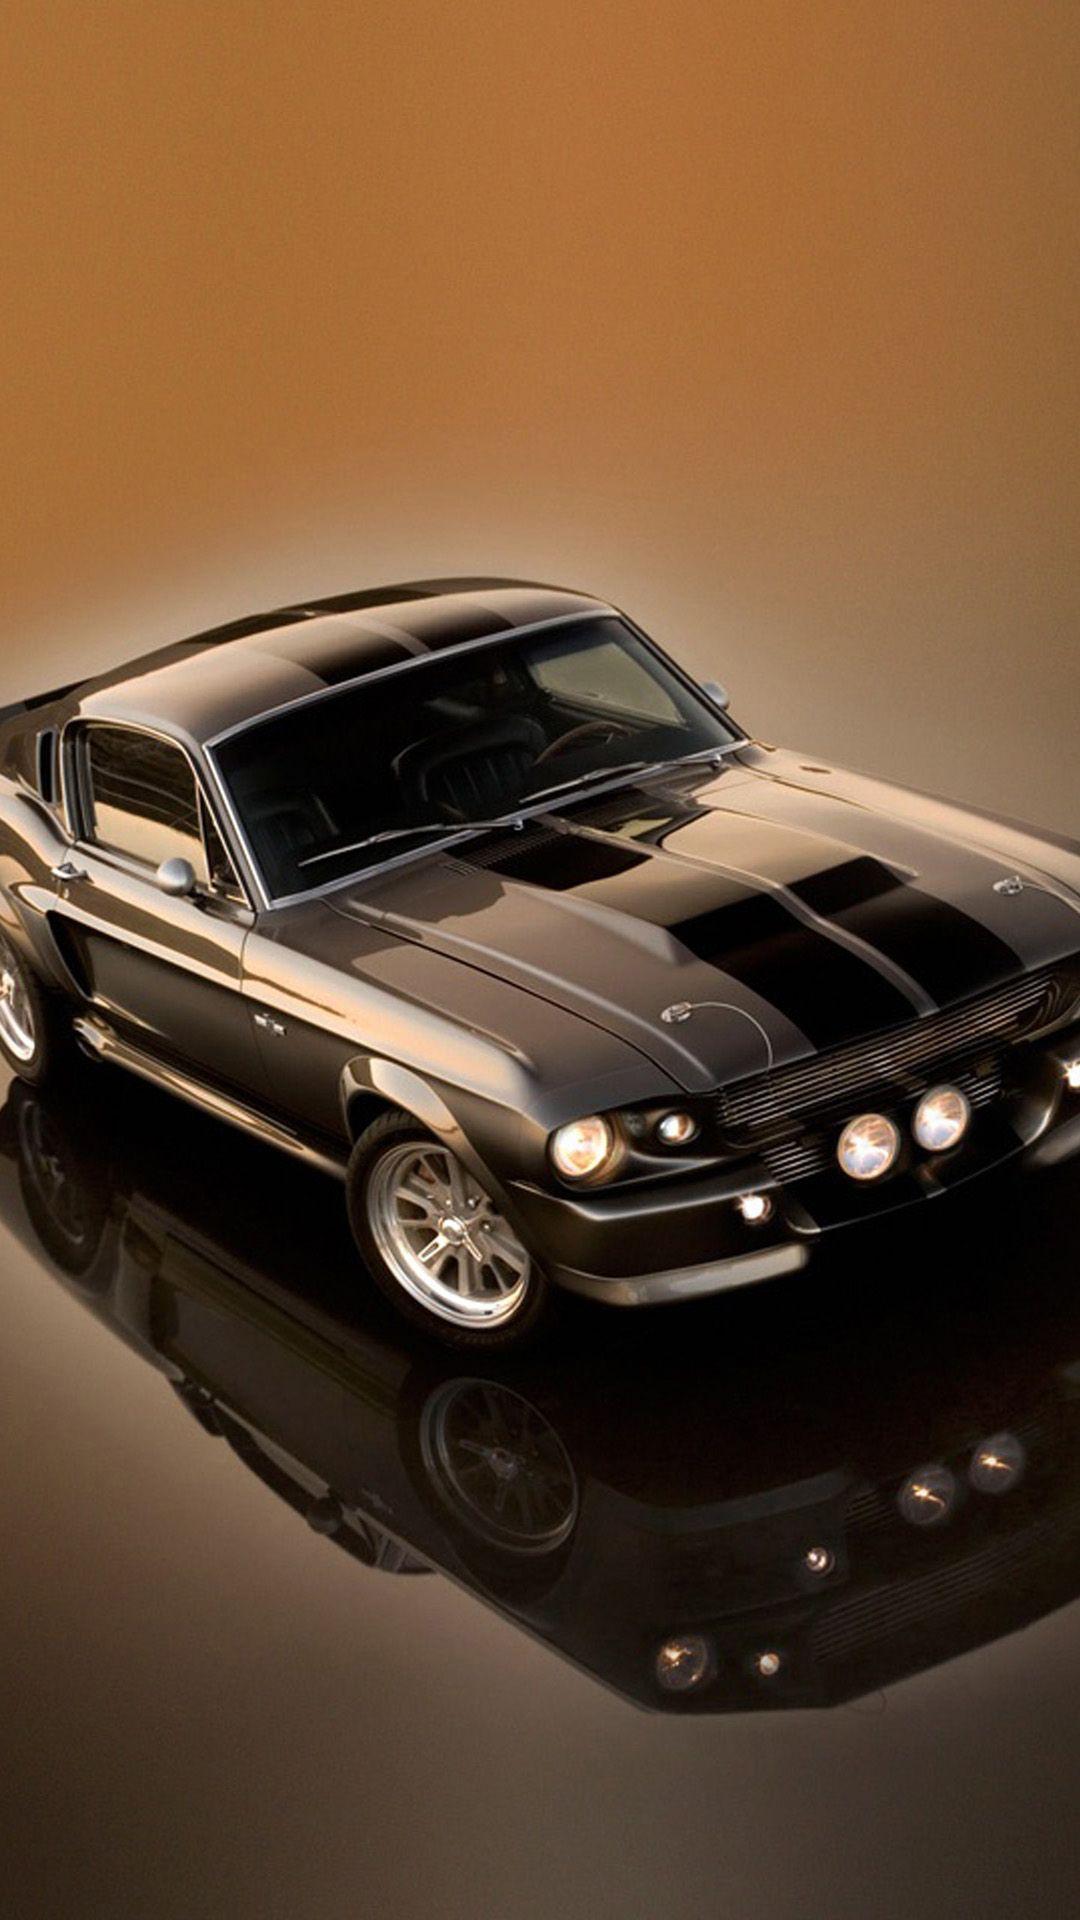 Ford Mustang Shelby GT500 Eleanor HD Wallpaper iPhone 6 plus